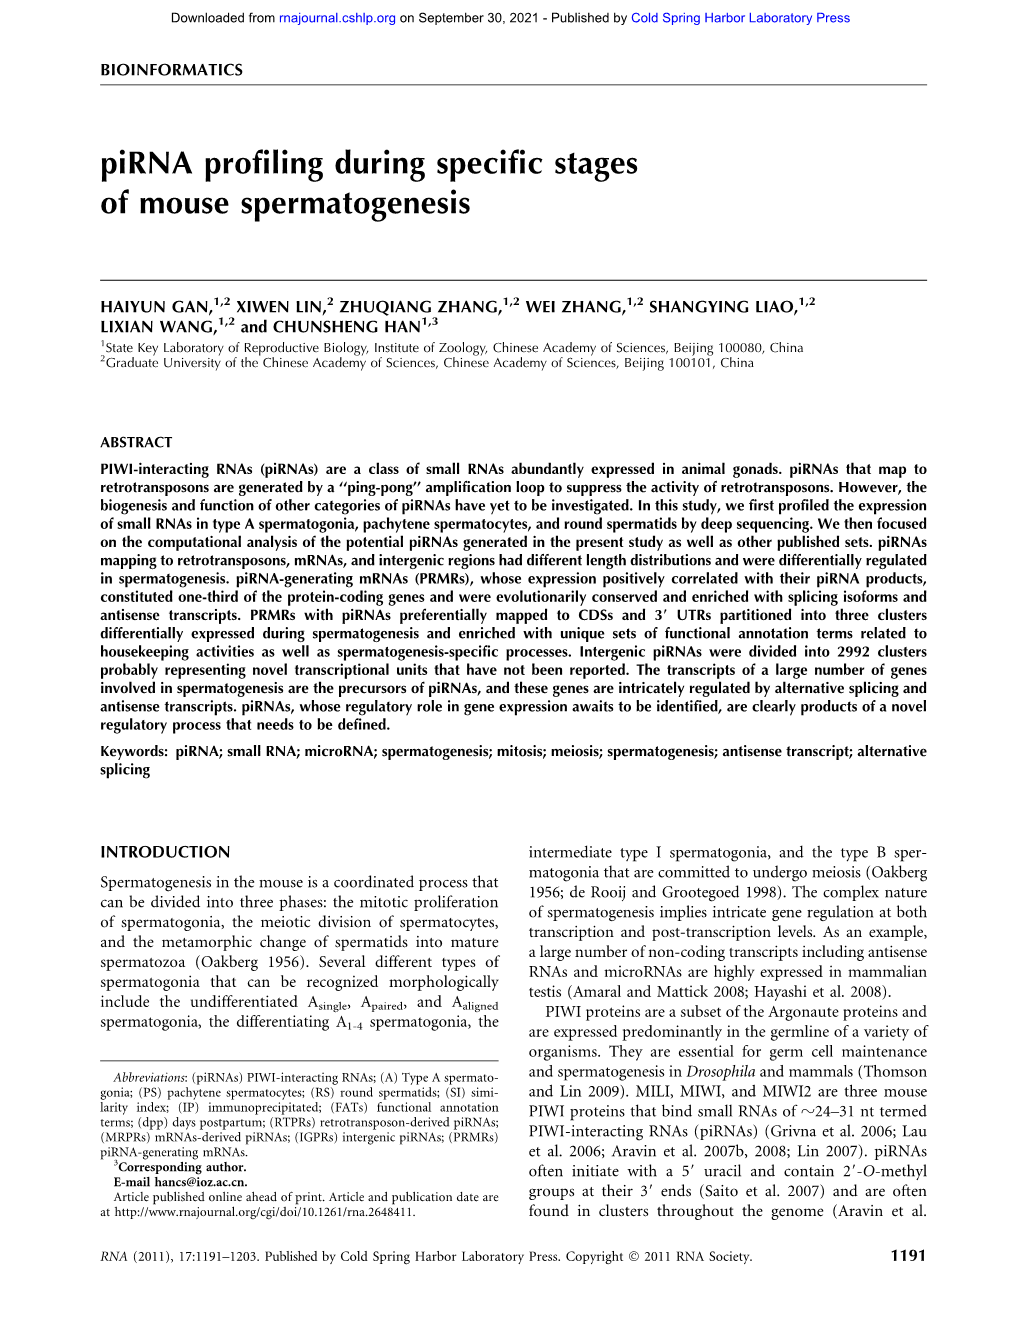 Pirna Profiling During Specific Stages of Mouse Spermatogenesis